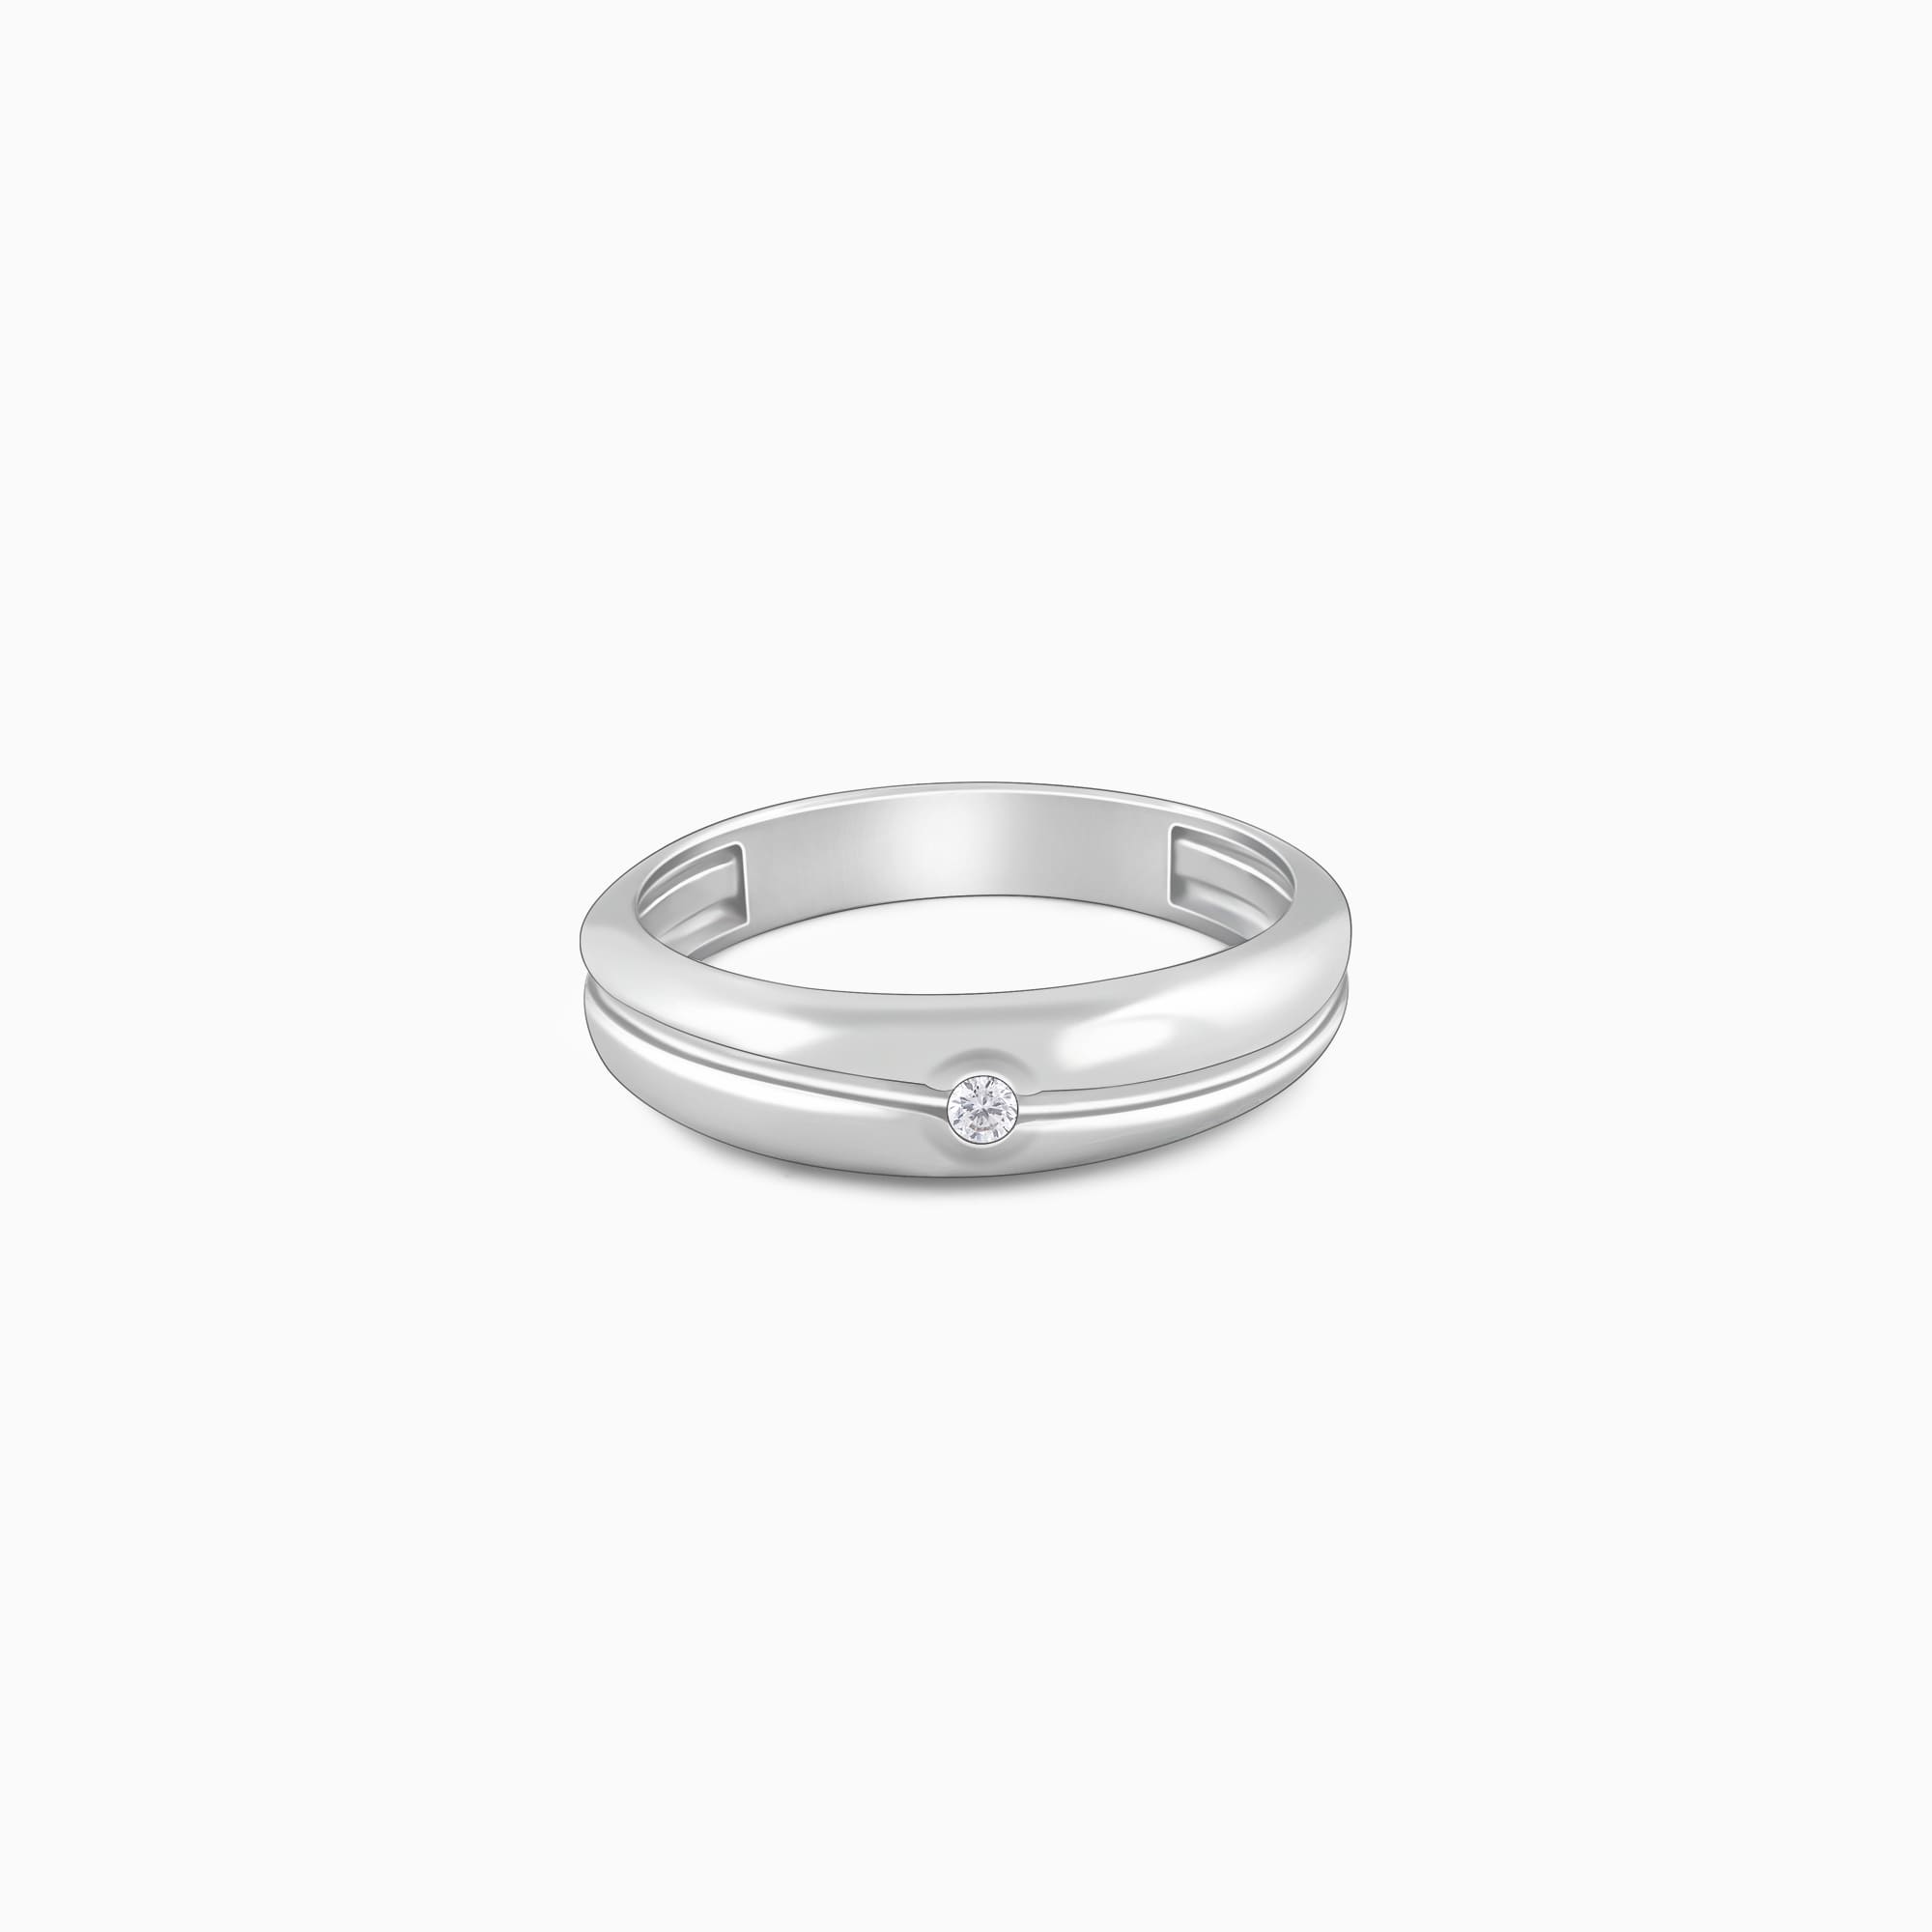 Spot goods)Pandora Couple Ring Promise Ring 925 Silver Wedding Engagement  Ring For Girl Friends BoyFriends Valentine's Day Gifts | Shopee Malaysia